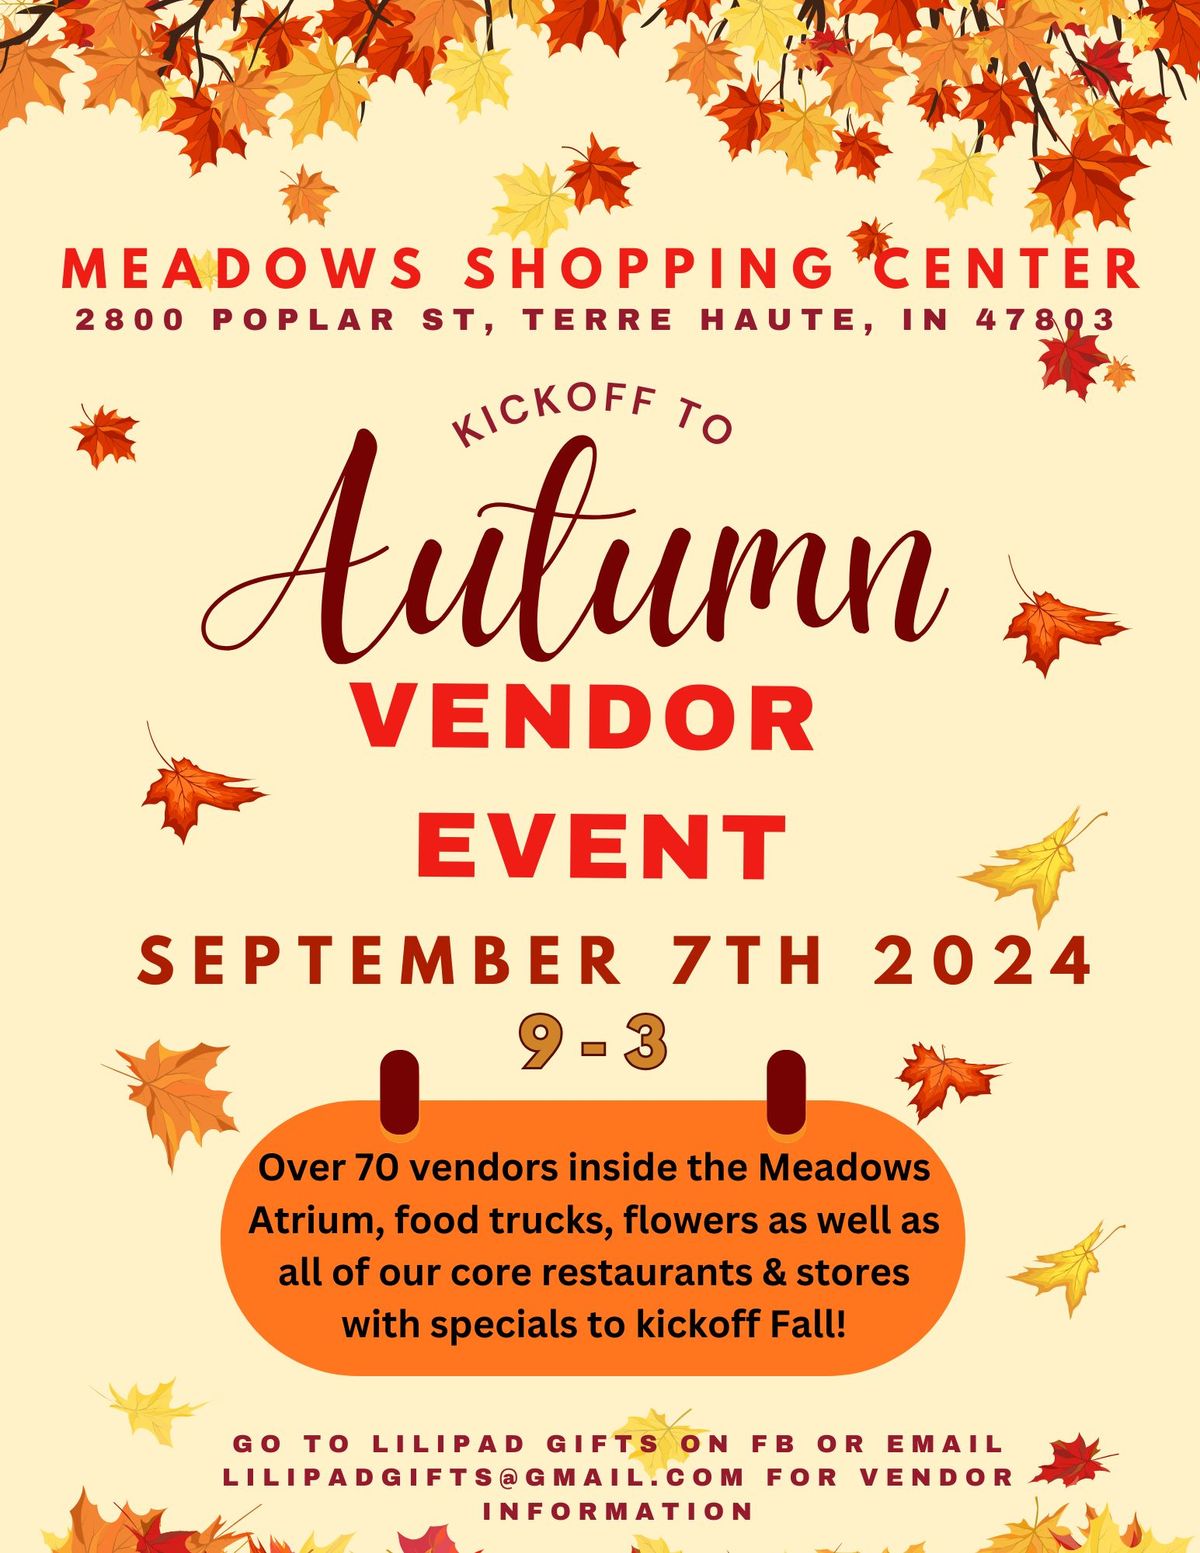 Kickoff to Fall Vendor Event at Meadows 